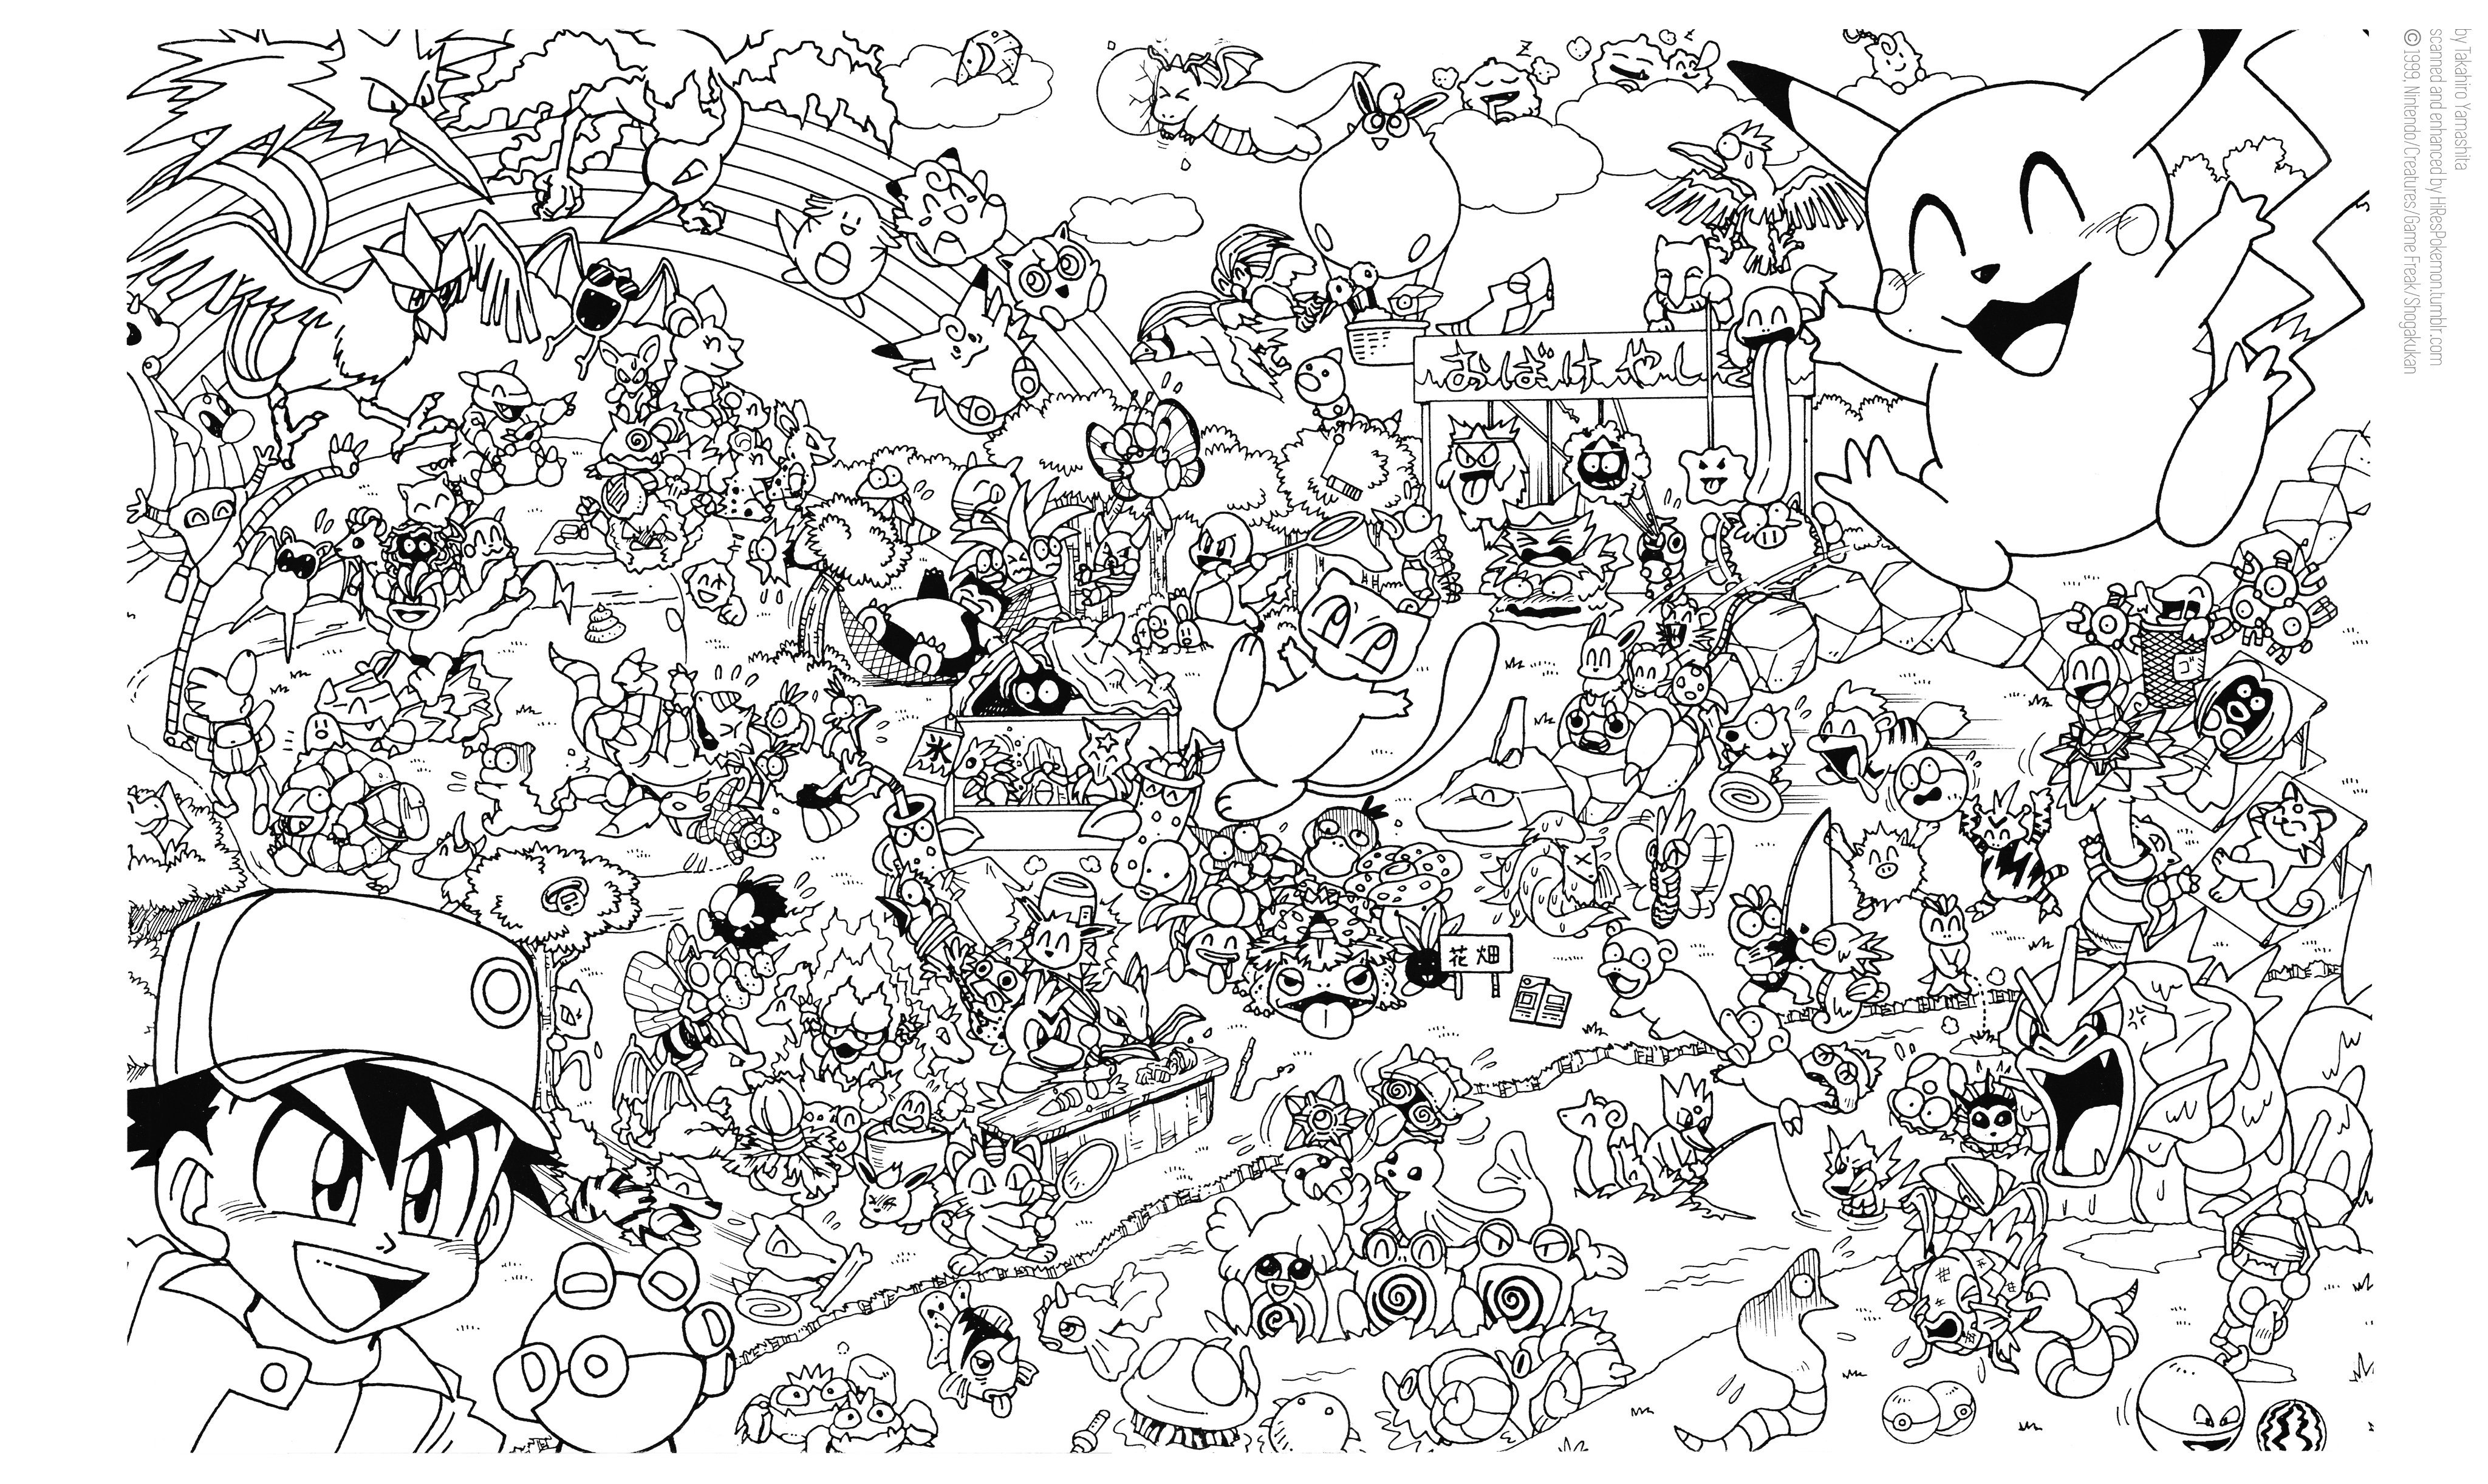 Hi Res Pokemon Rescuing Official Pokemon Art 1999 Takahiro Yamashita やました たかひろ Big Panorama From The Backside Of The Cover Of ポケモン4コマ笑事典 Pokemon 4koma Gag Encyclopedia And Some Details T Co A6aeirrs2z